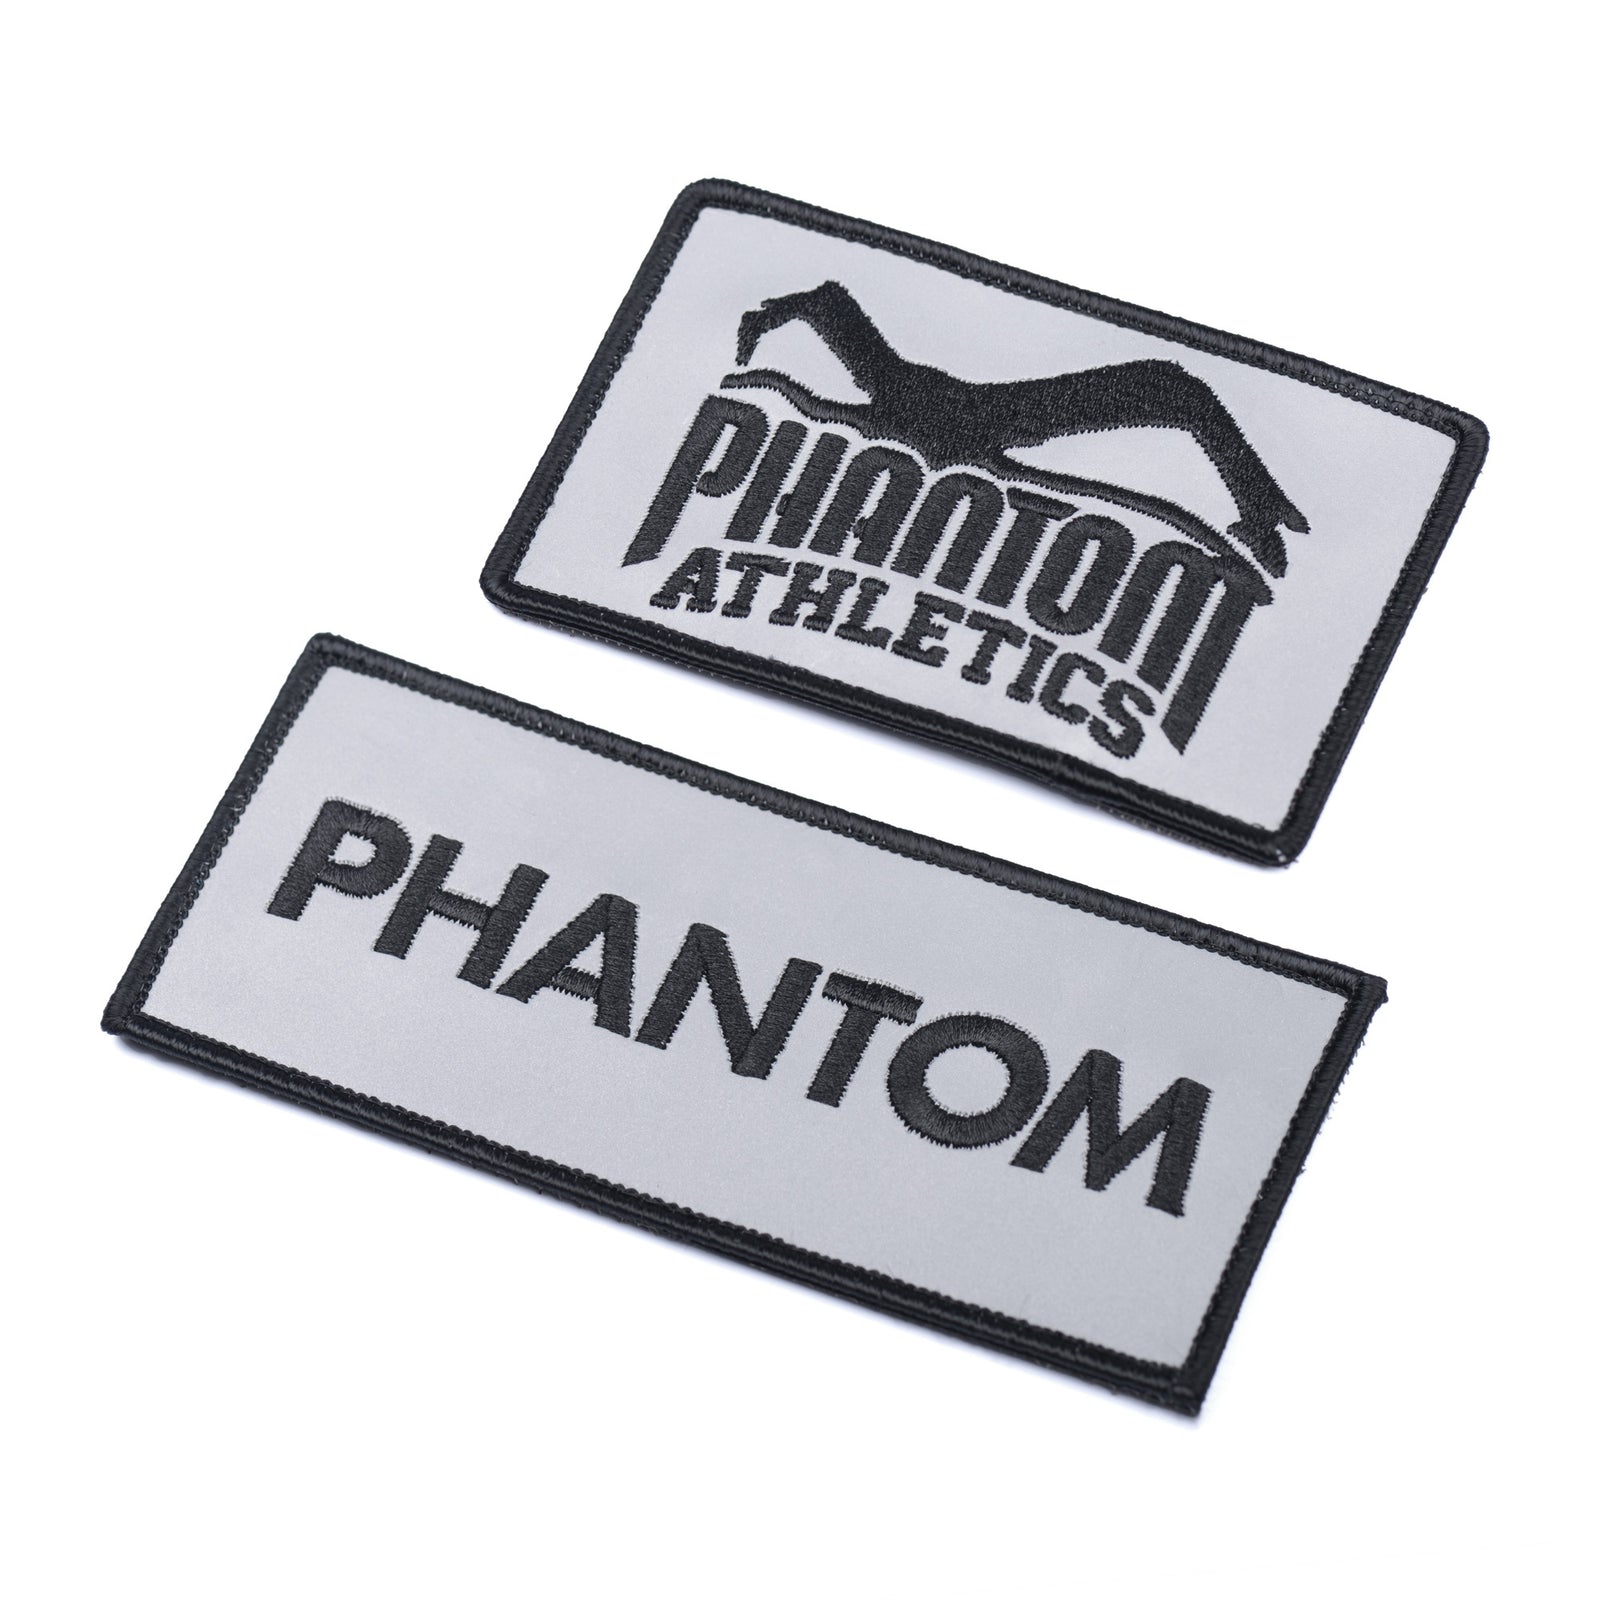 Patches and Patches  Fitness + Martial Arts - PHANTOM ATHLETICS